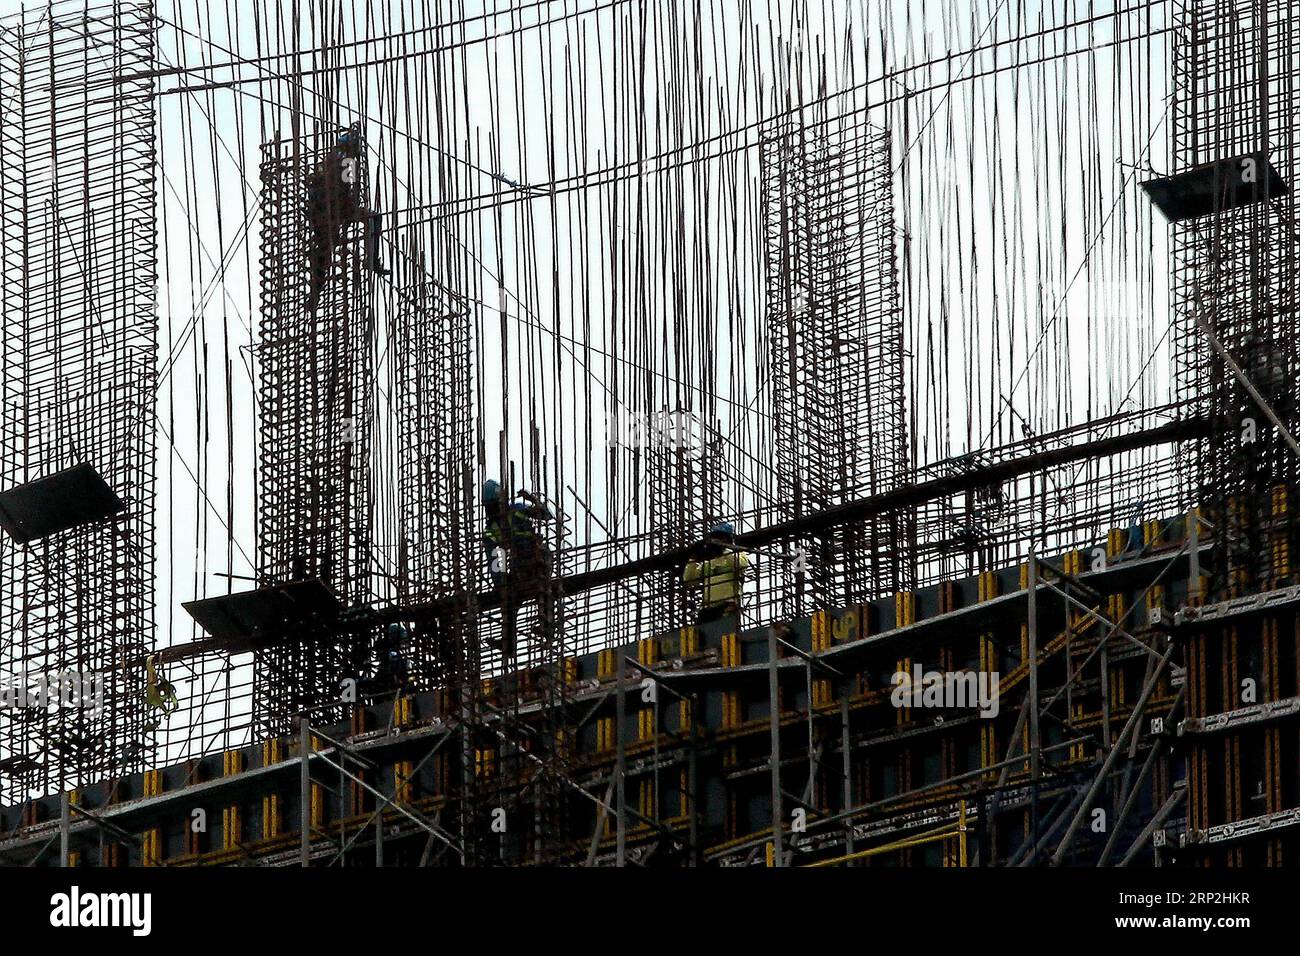 (180904) -- QUEZON CITY, Sep. 4, 2018 -- People work at a construction site of a building in Quezon City, the Philippines, Sep. 4, 2018. The Philippine central bank projected overall increase in prices of widely-used goods and services to settle at around 5.9 percent year-on-year in August. )(rh) PHILIPPINES-QUEZON CITY-ECONOMY ROUELLExUMALI PUBLICATIONxNOTxINxCHN Stock Photo